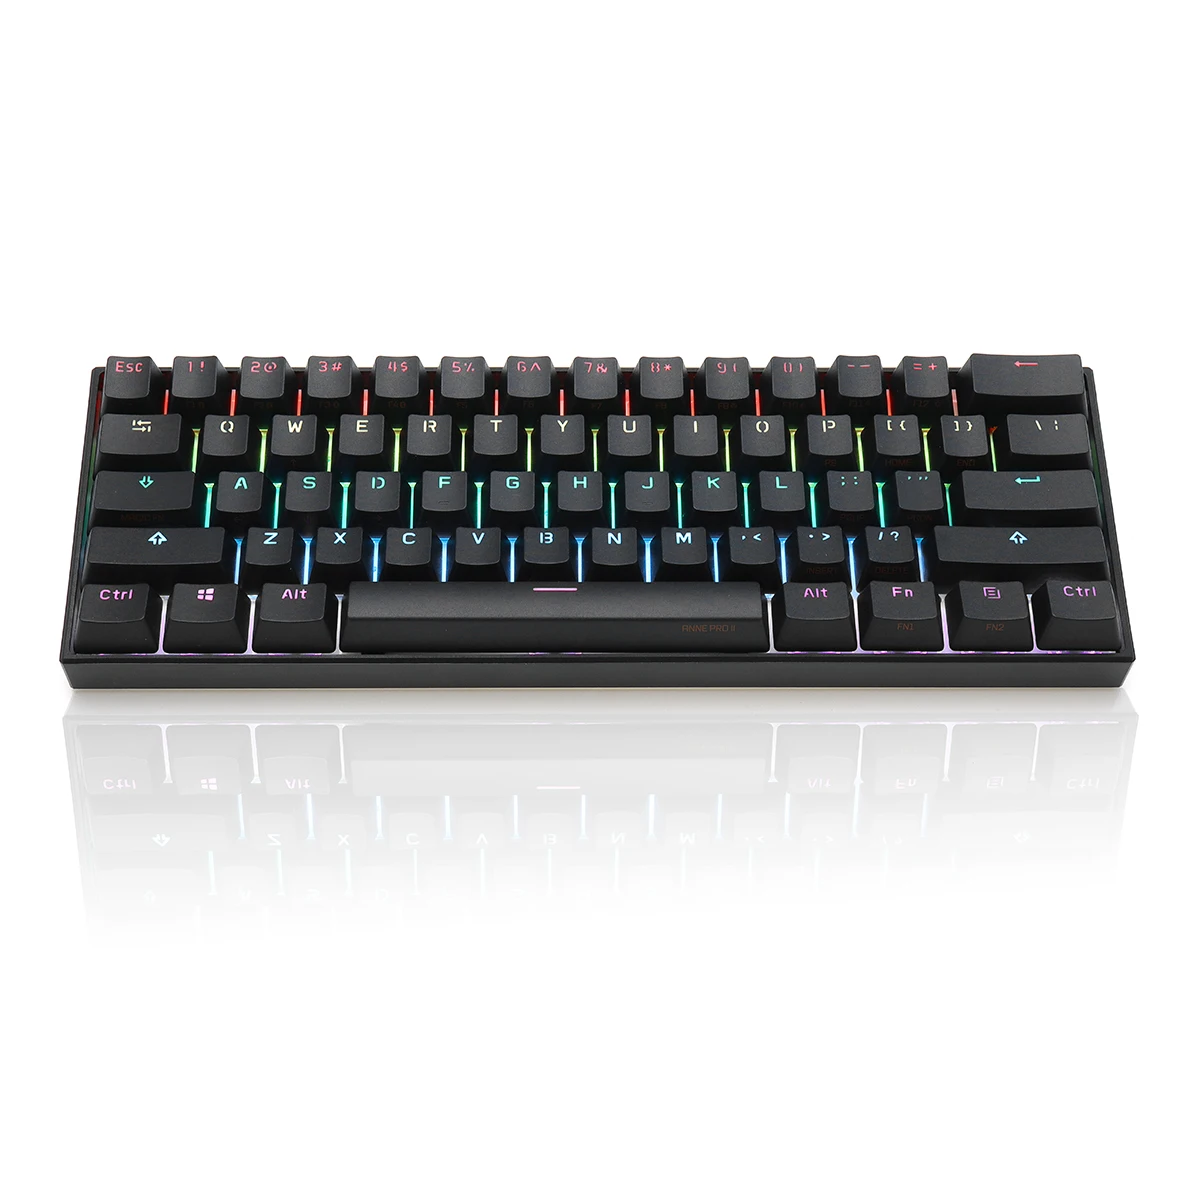 anne pro2 mini portable wireless bluetooth 60 mechanical keyboard red blue brown switch gaming keyboard detachable cable hot free global shipping